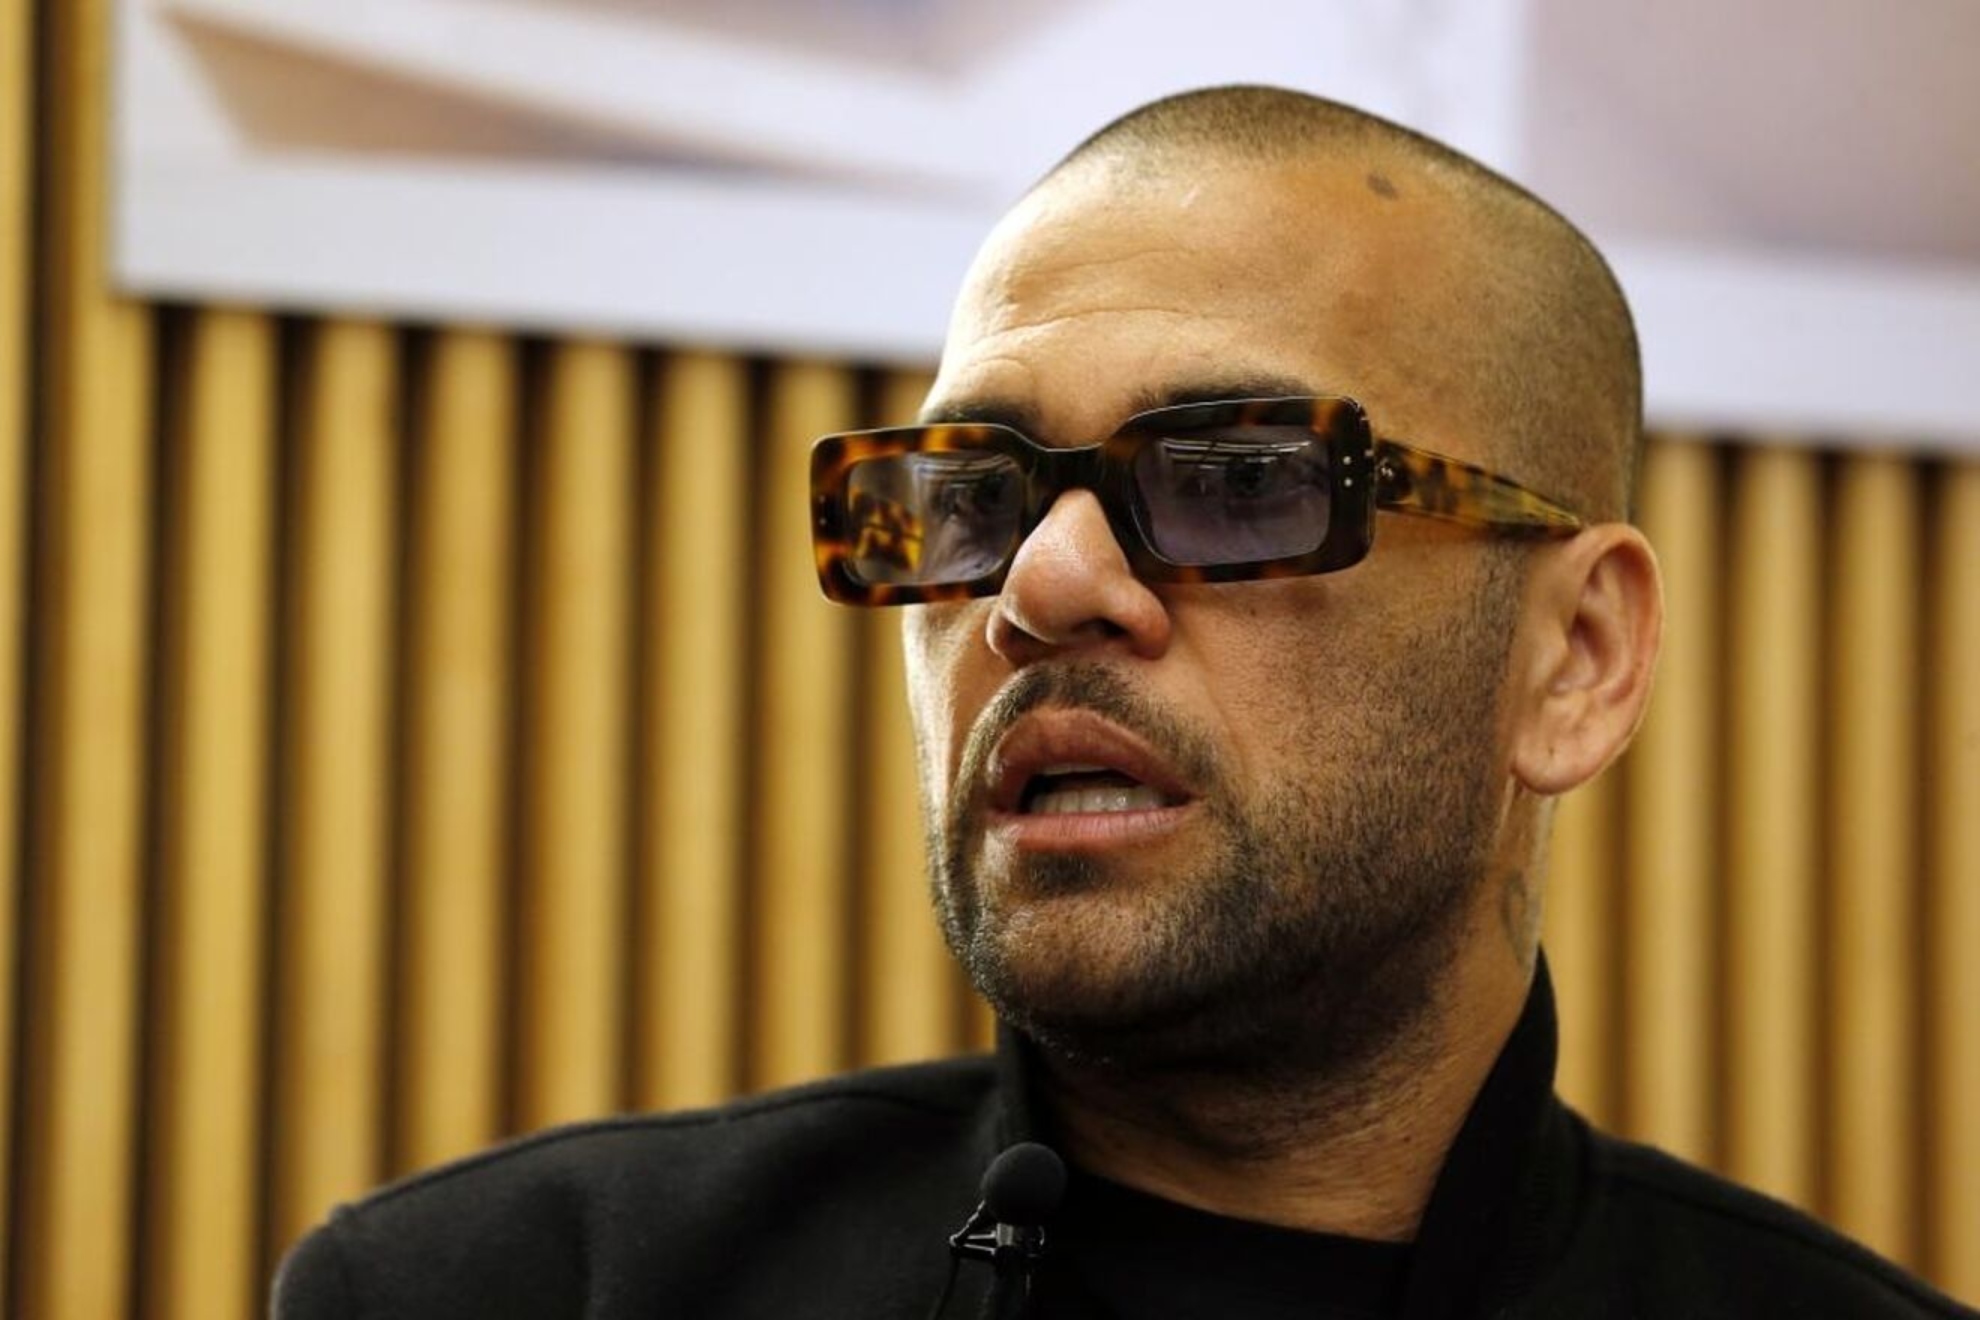 The judge overseeing the investigation into the Dani Alves sexual assault case took testimony from eight witnesses at a closed hearing in Barcelona